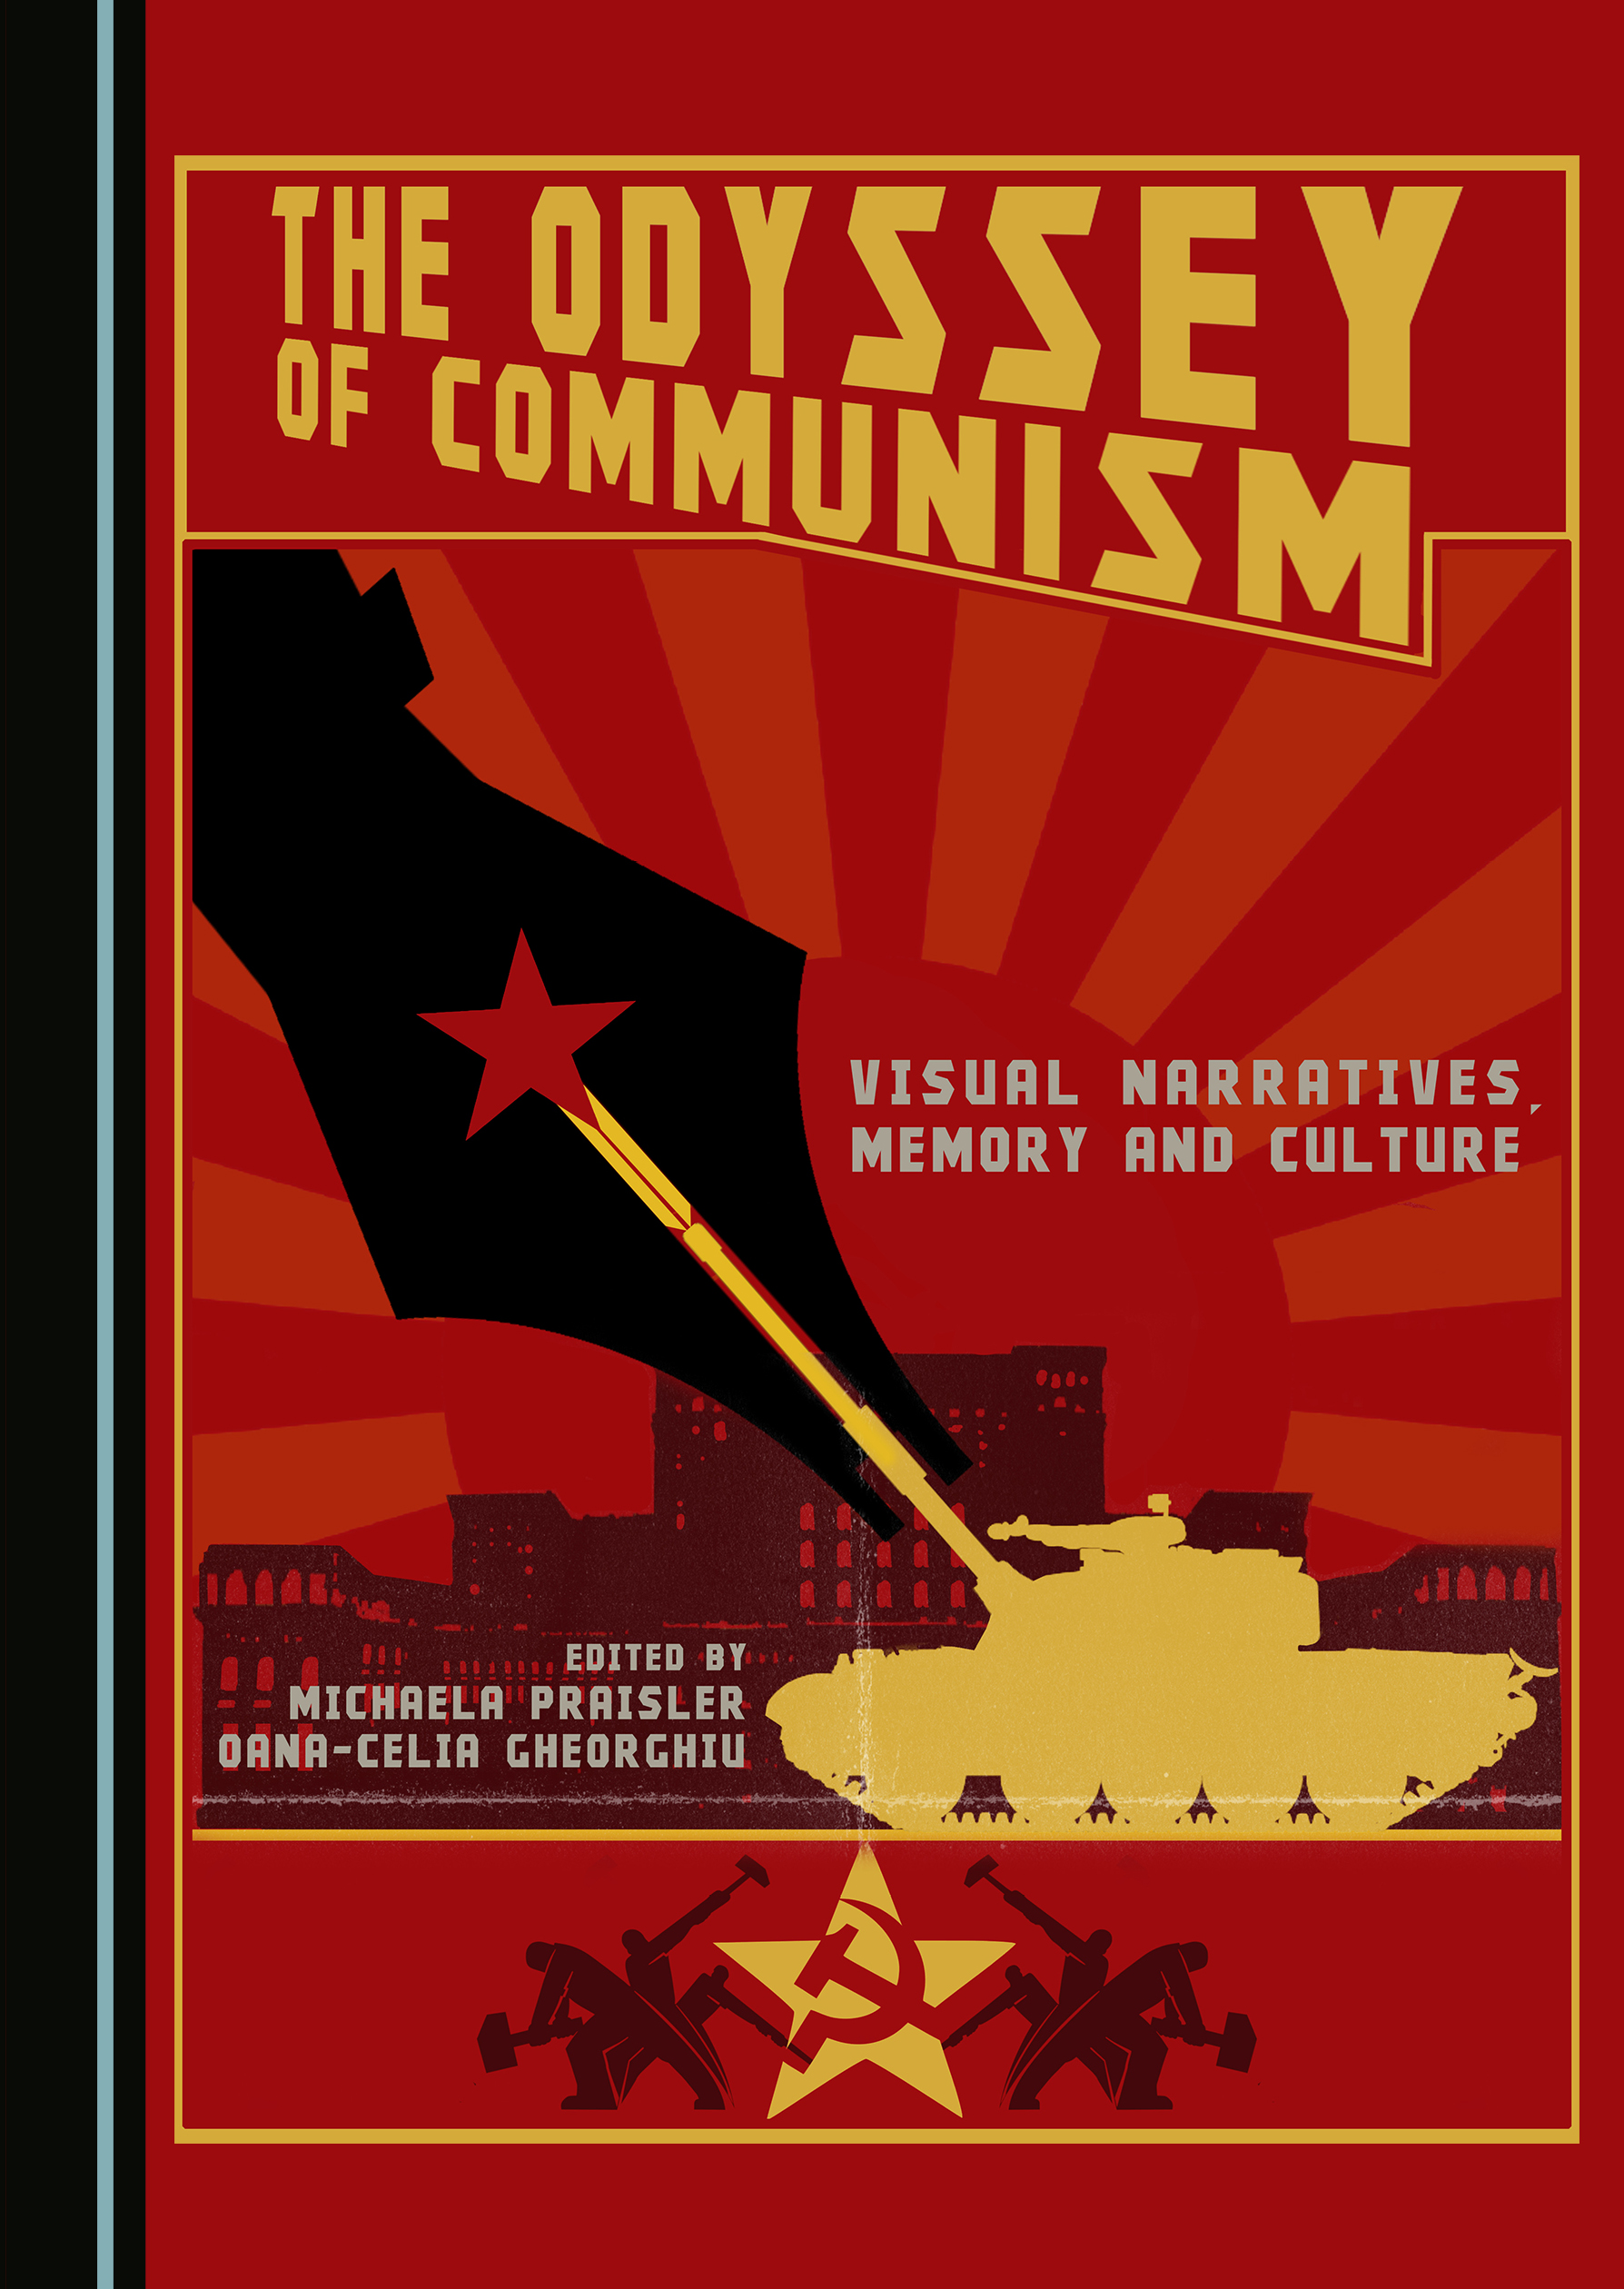 Through Space and Time - Review of The Odyssey of Communism: Visual Narratives, Memory and Culture edited by Michaela Praisler and Oana-Celia Gheorghiu, Cambridge Scholars Publishing, 2021